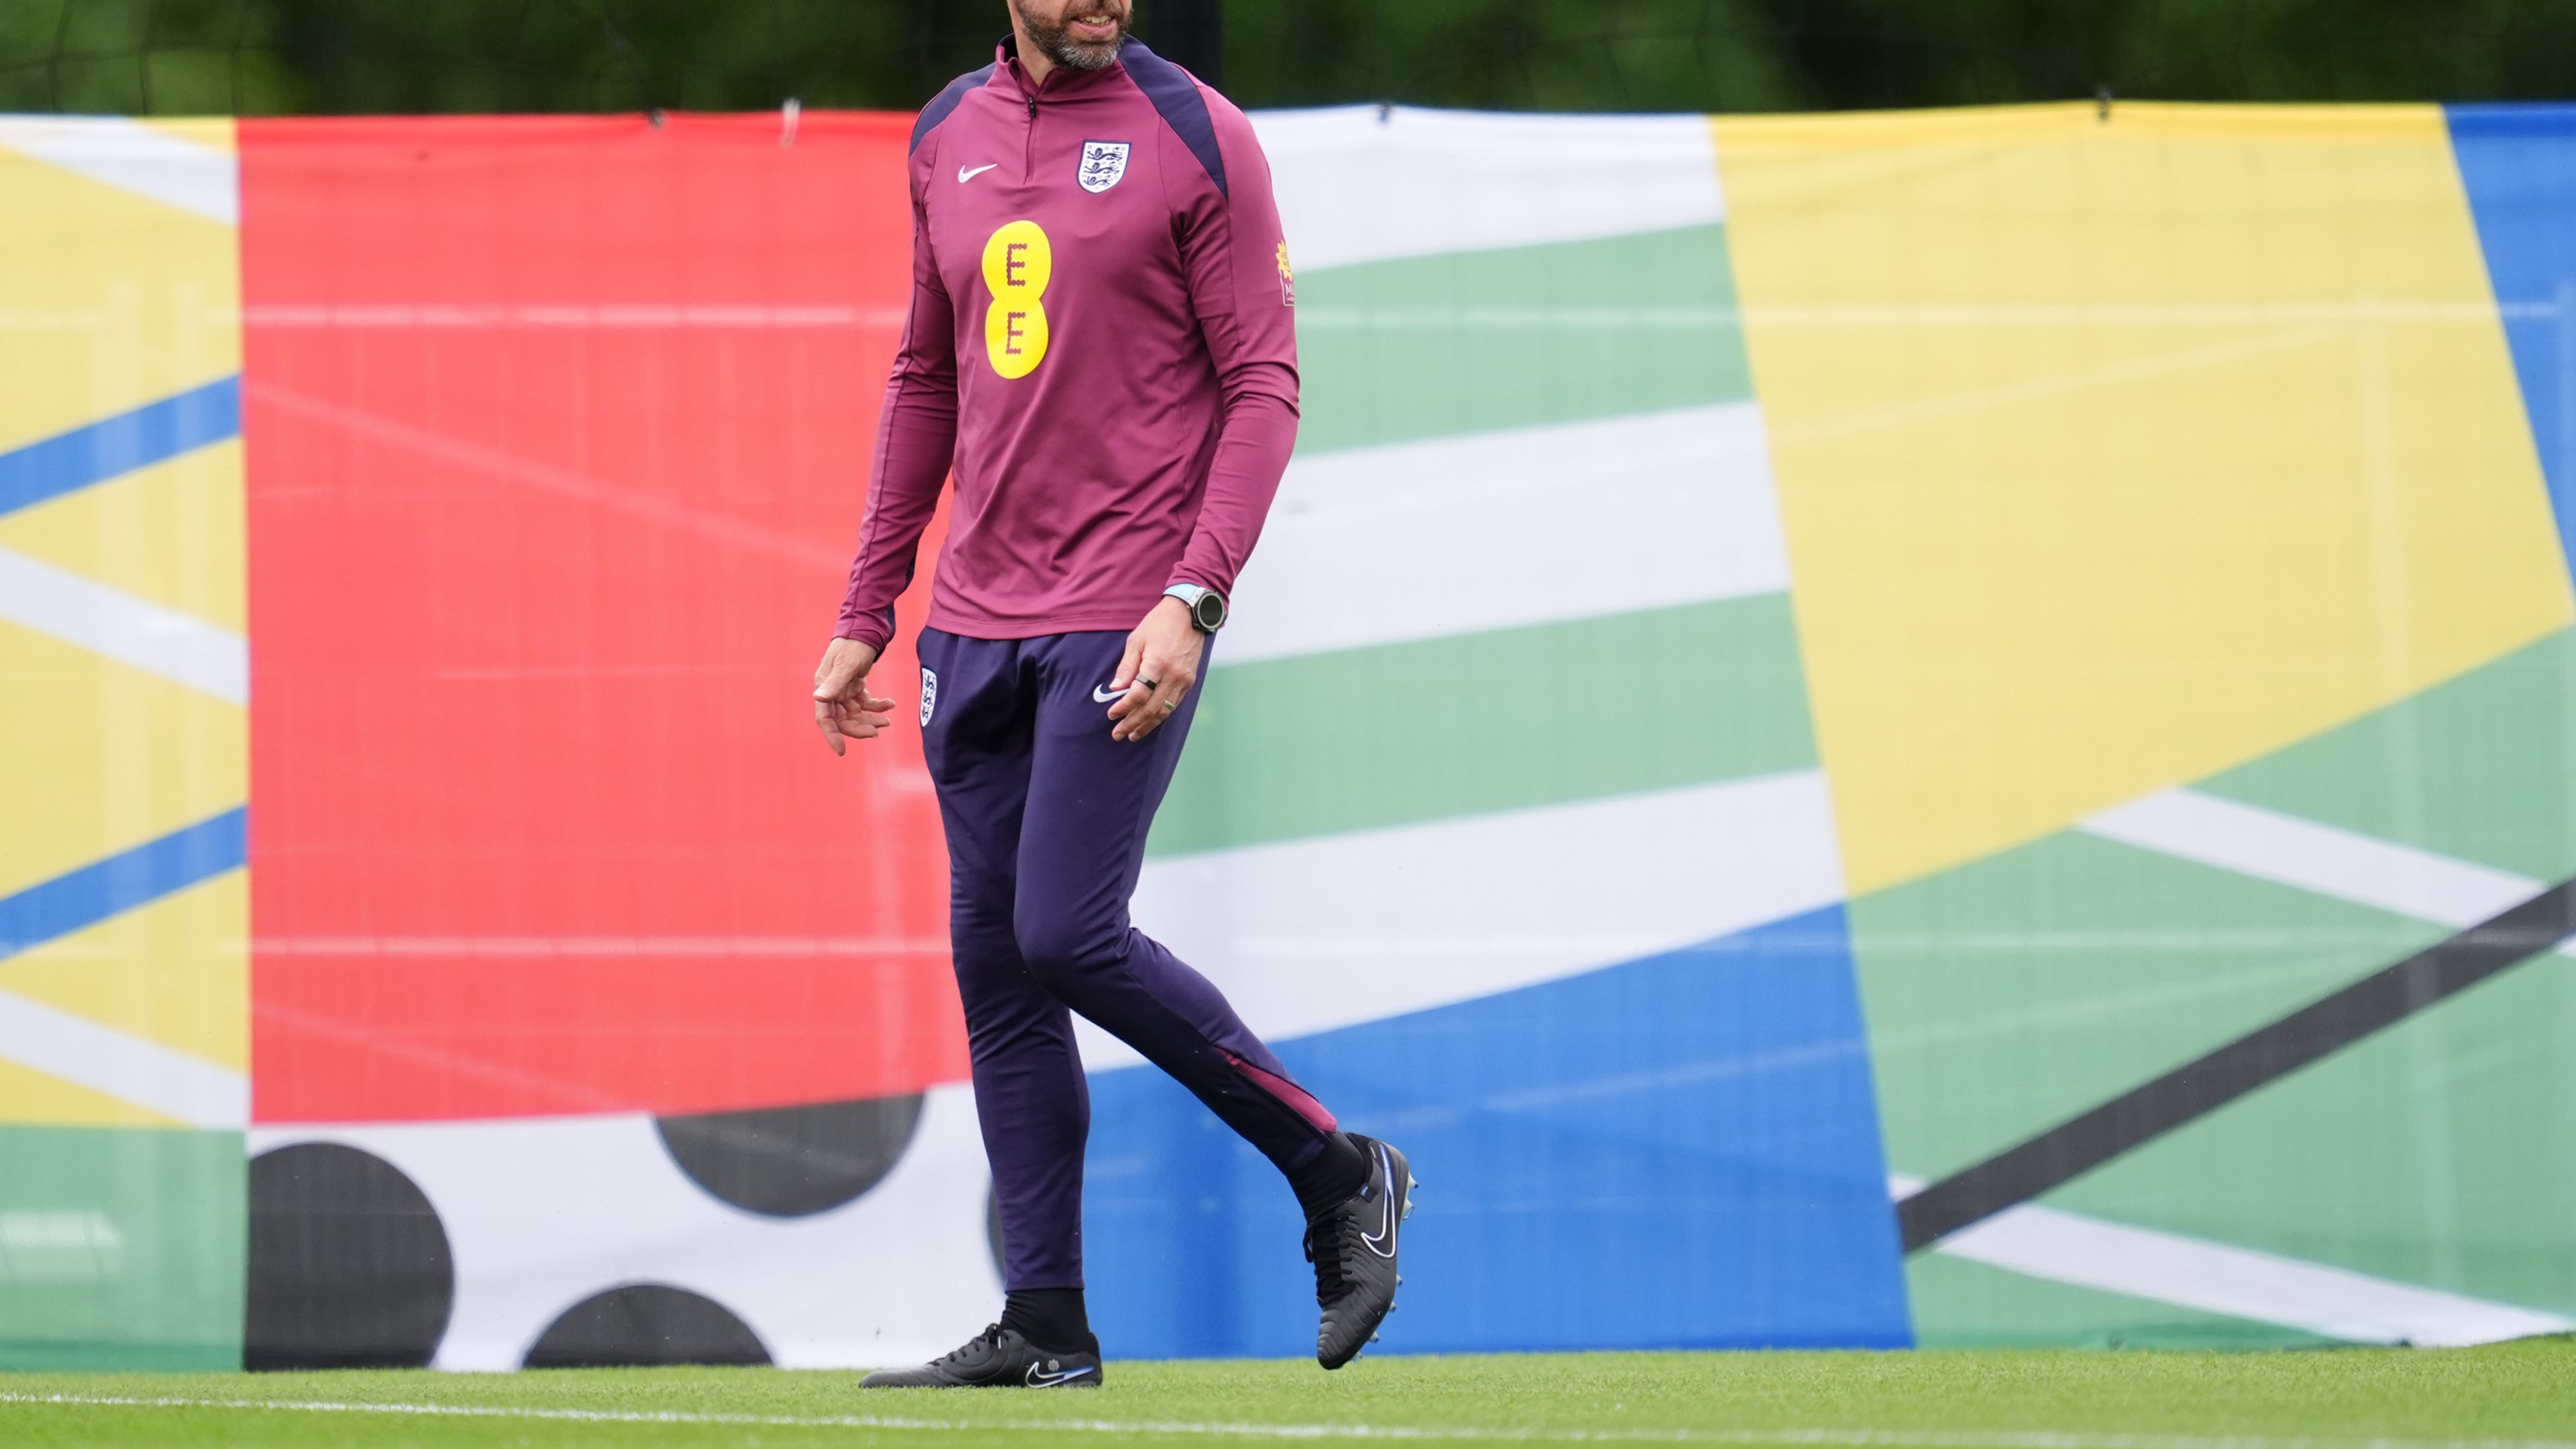 England manager Gareth Southgate oversees Wednesday’s training session .